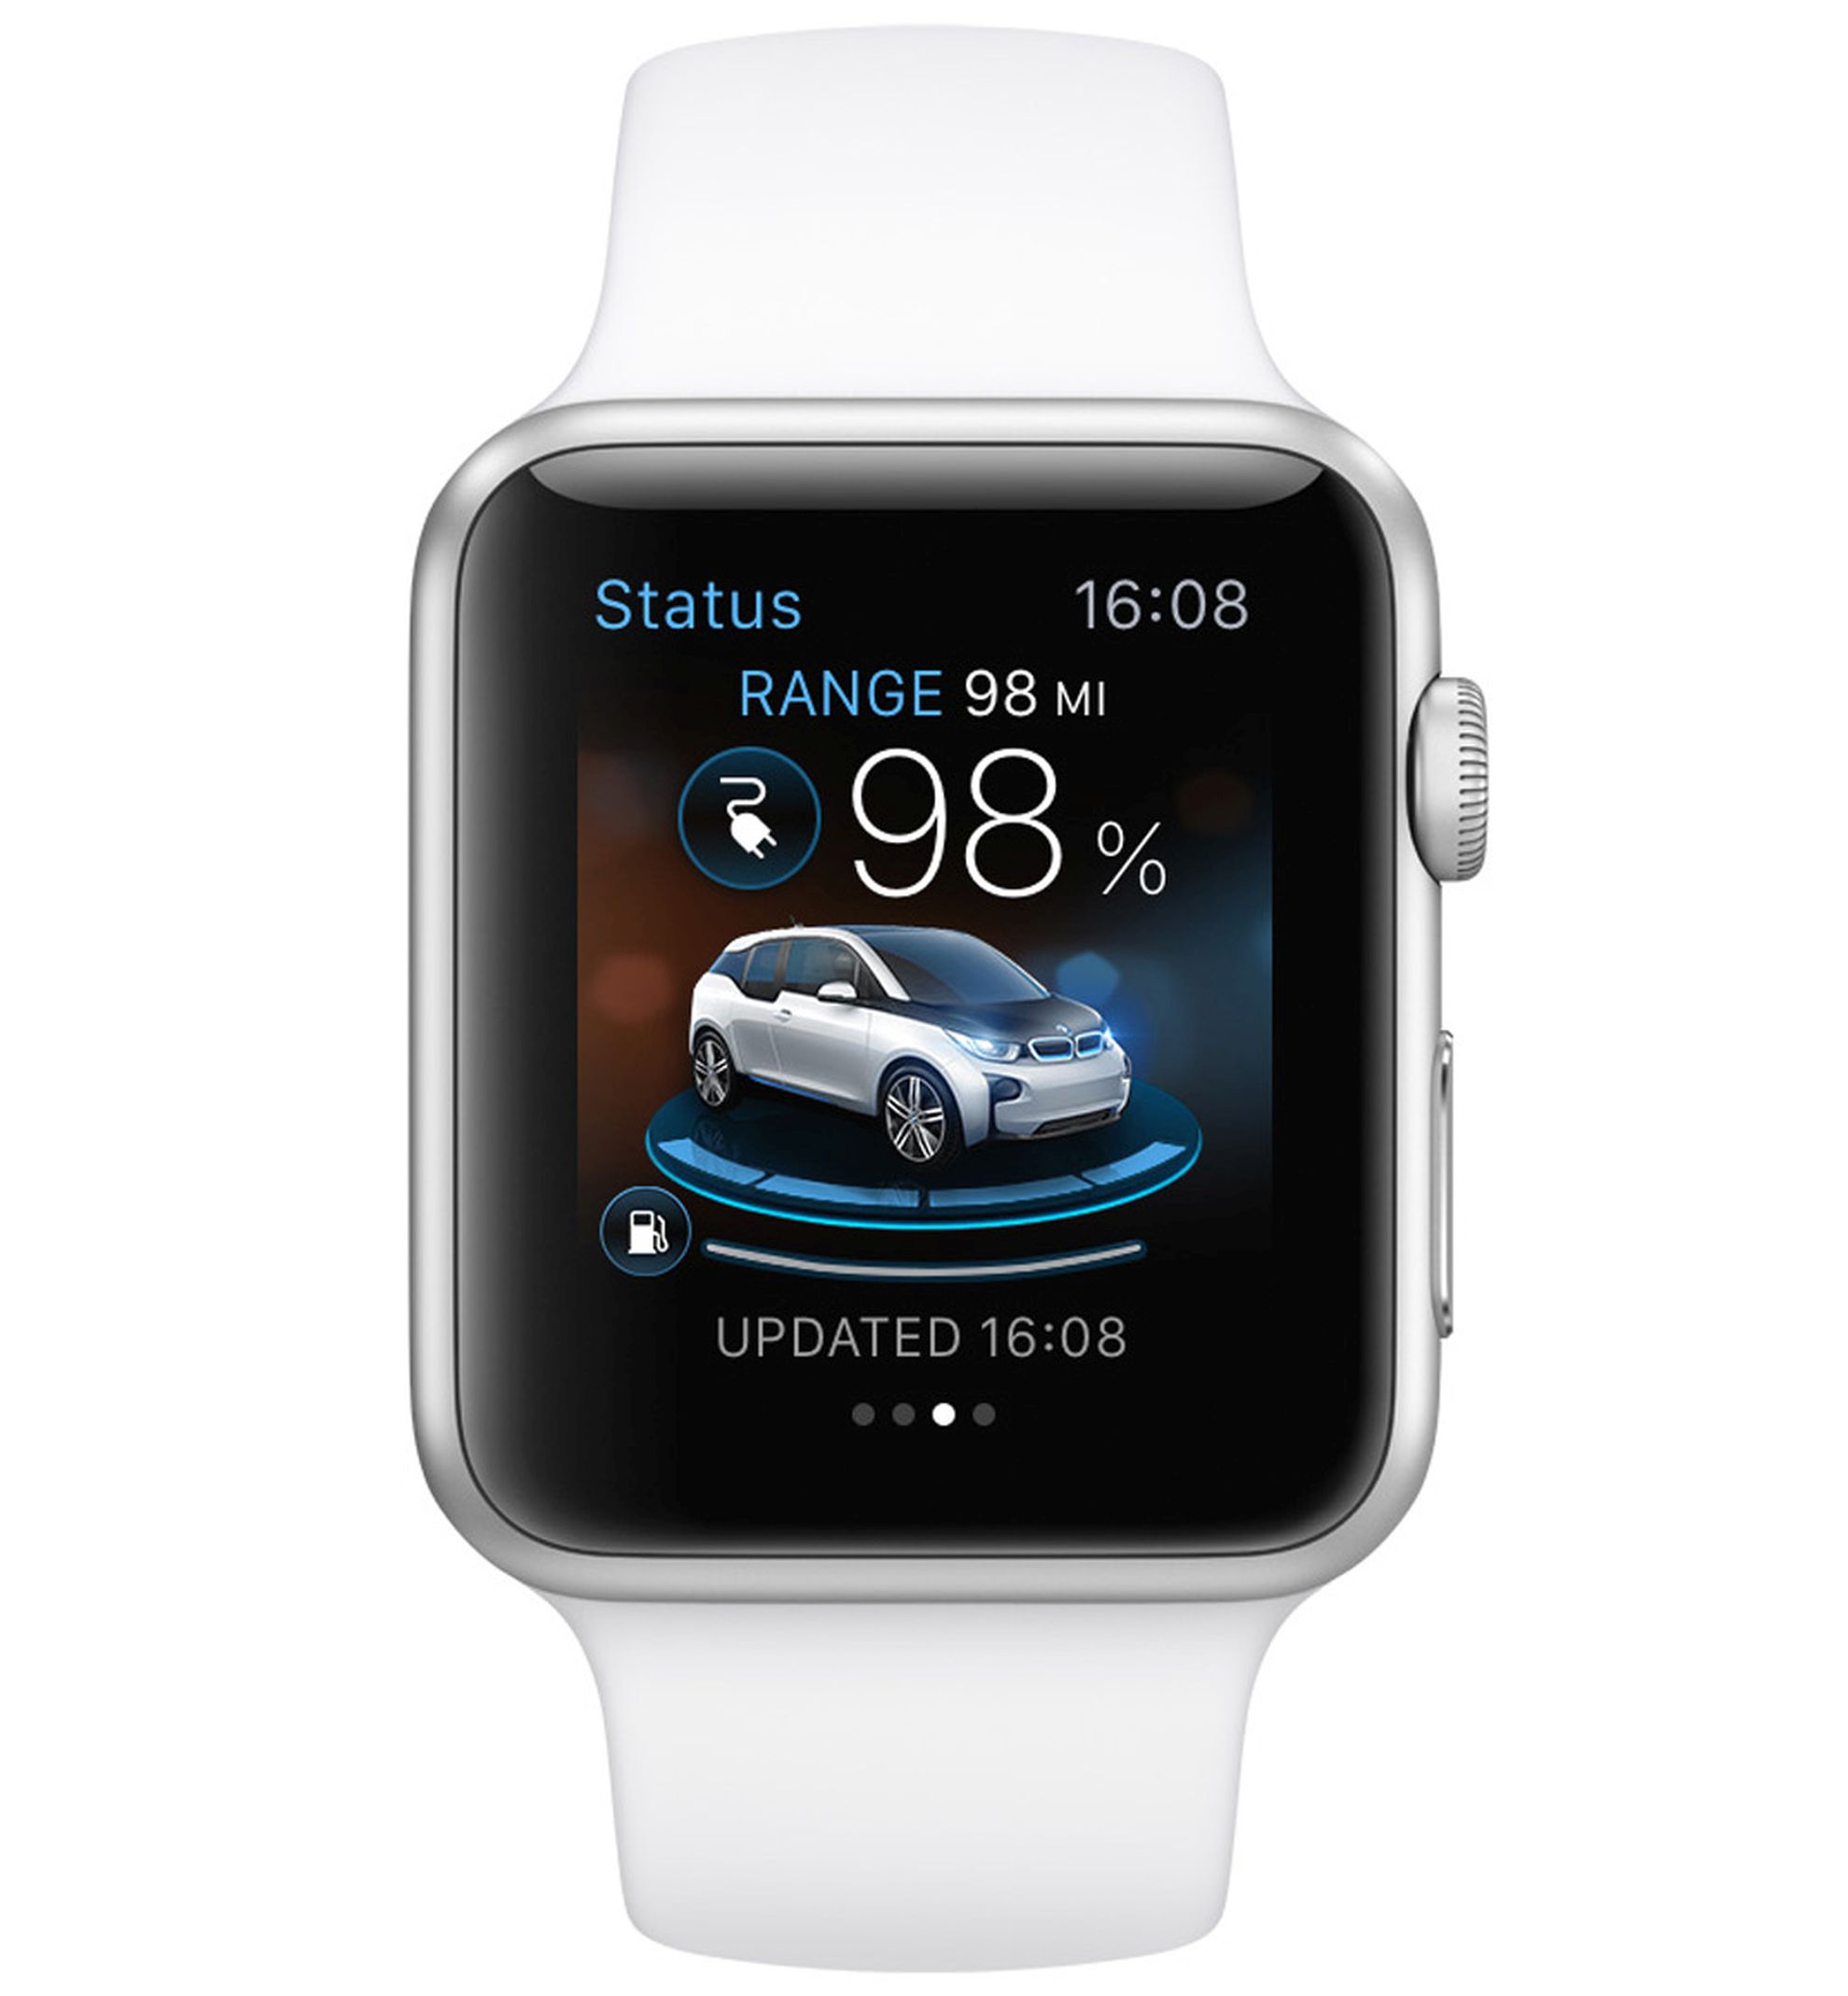 Apple Watch controls functions of BMW i models